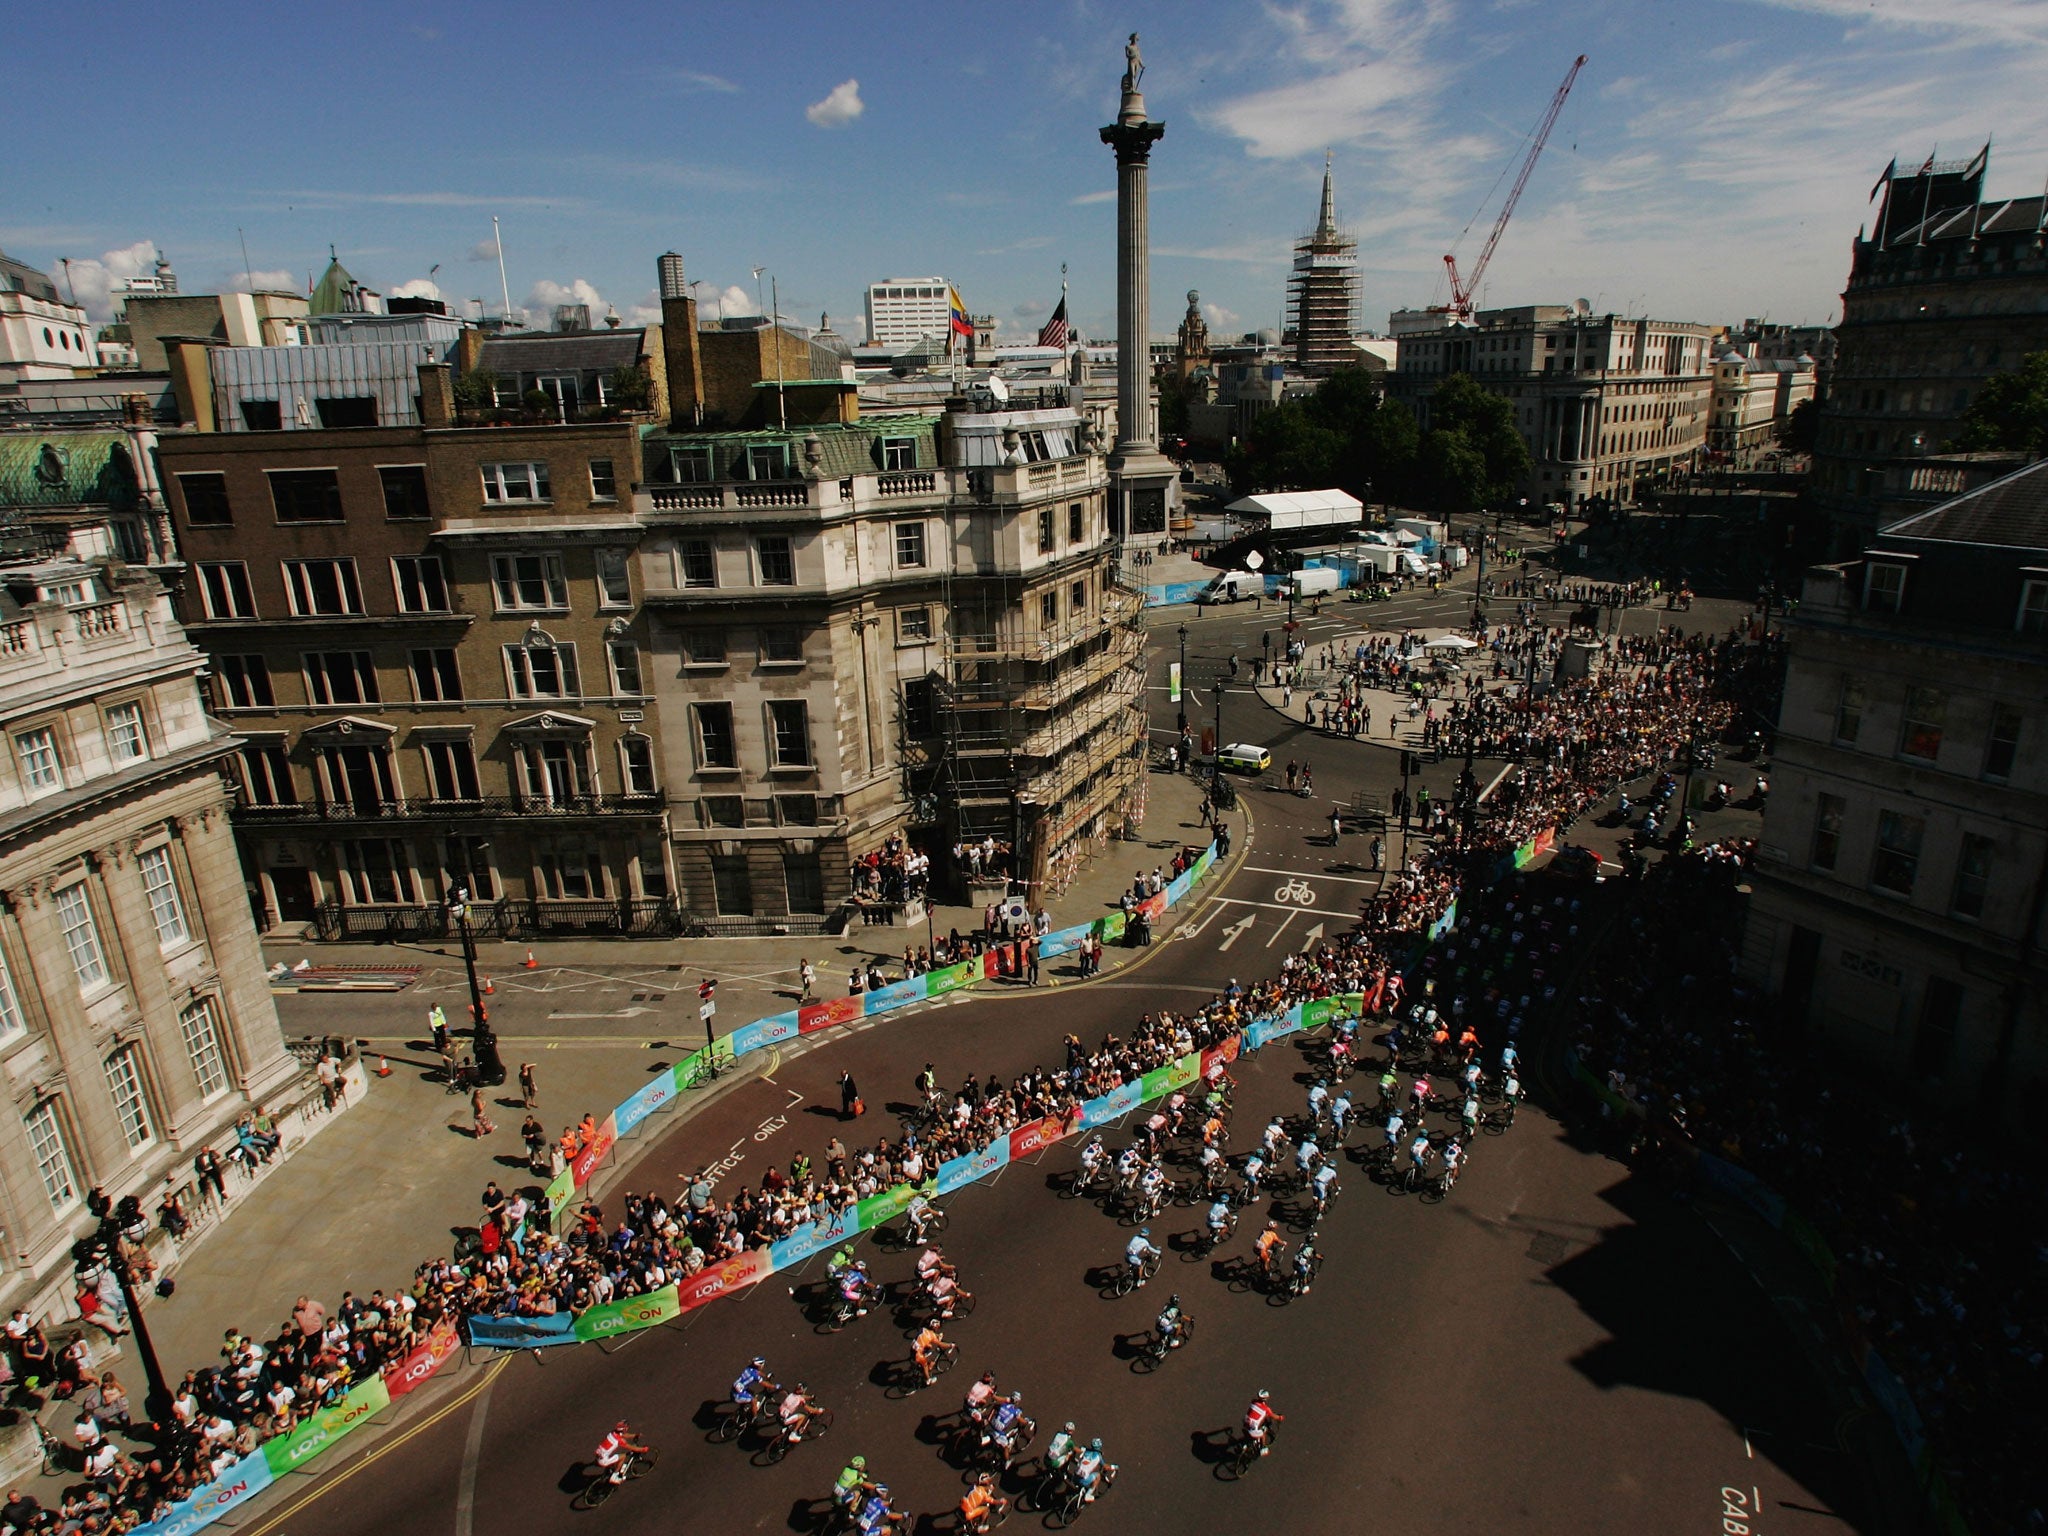 The Mall awaits the finish to Stage 3 - the last time the Tour came to London in 2007